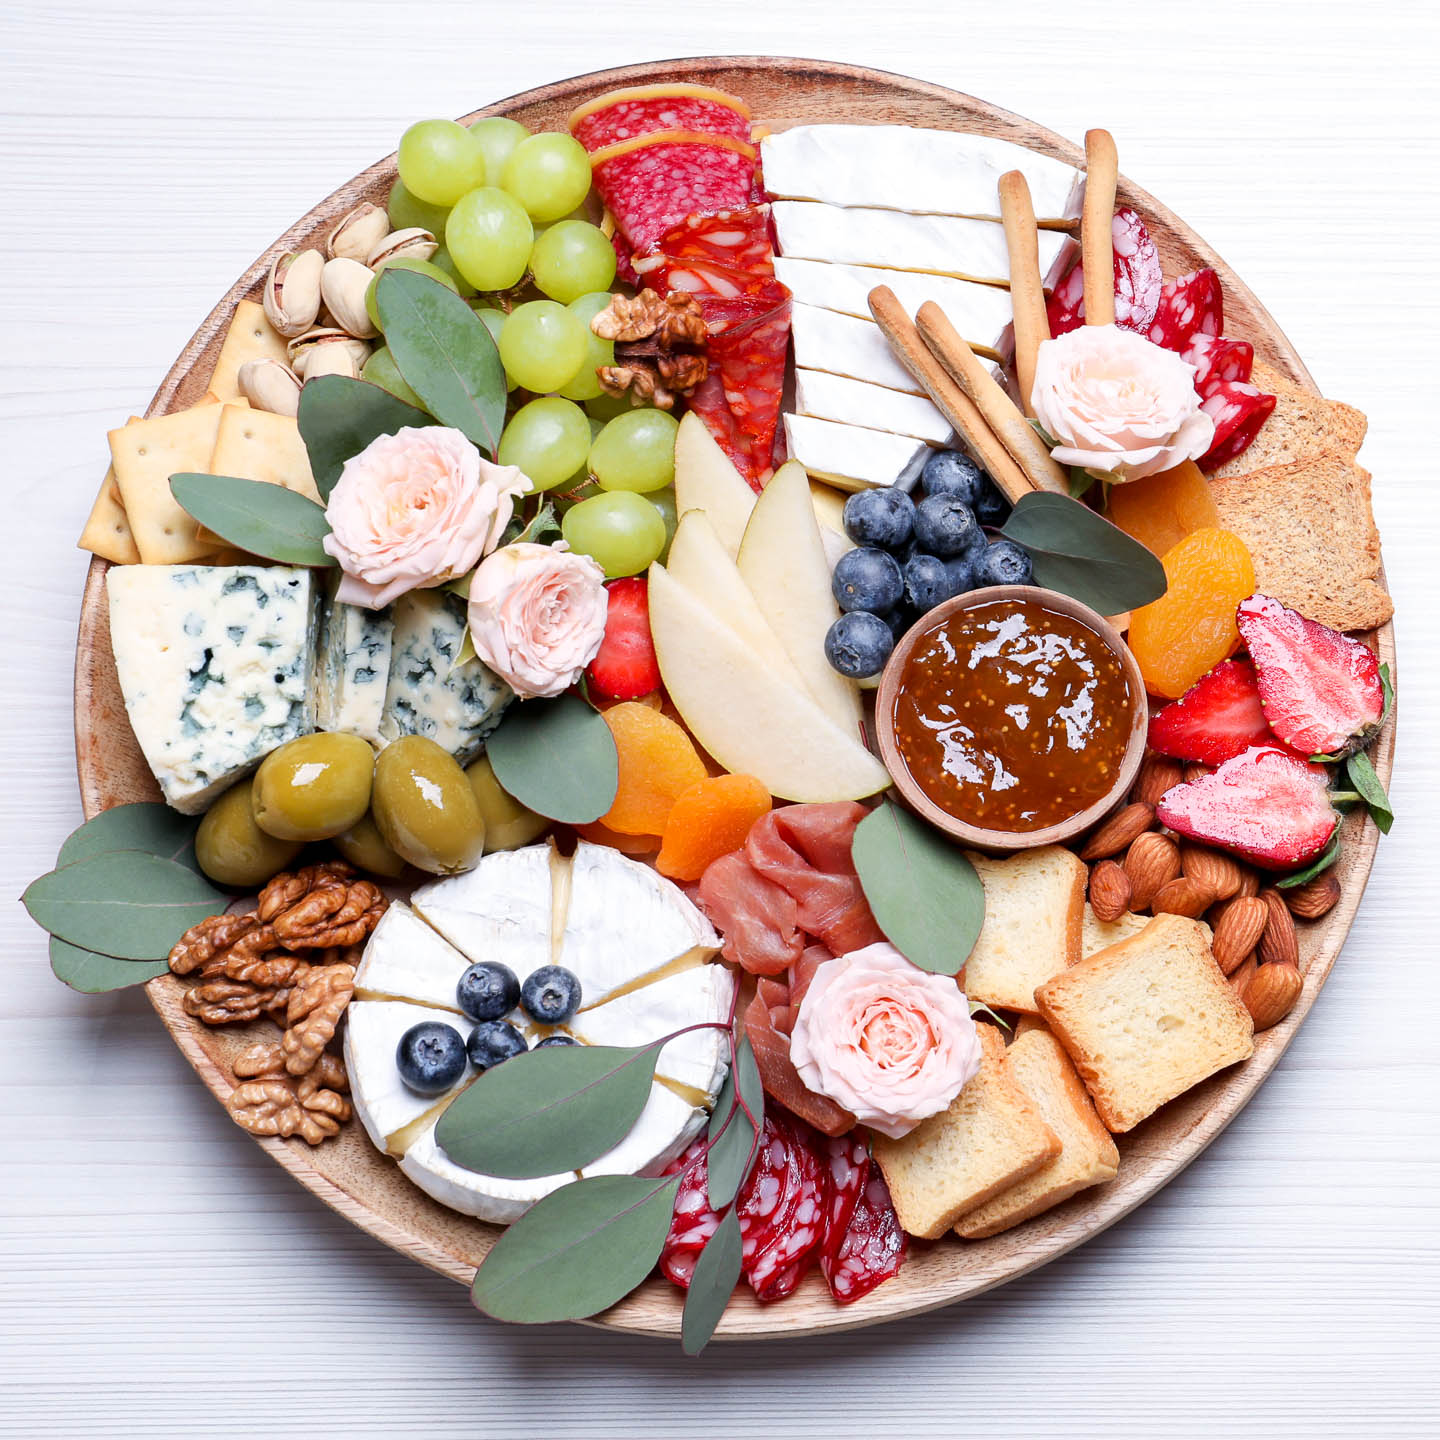 A round charcuterie board with cheeses, meats, jam, blueberries, grapes, apple slices, olives, apricots, nuts and roses on it